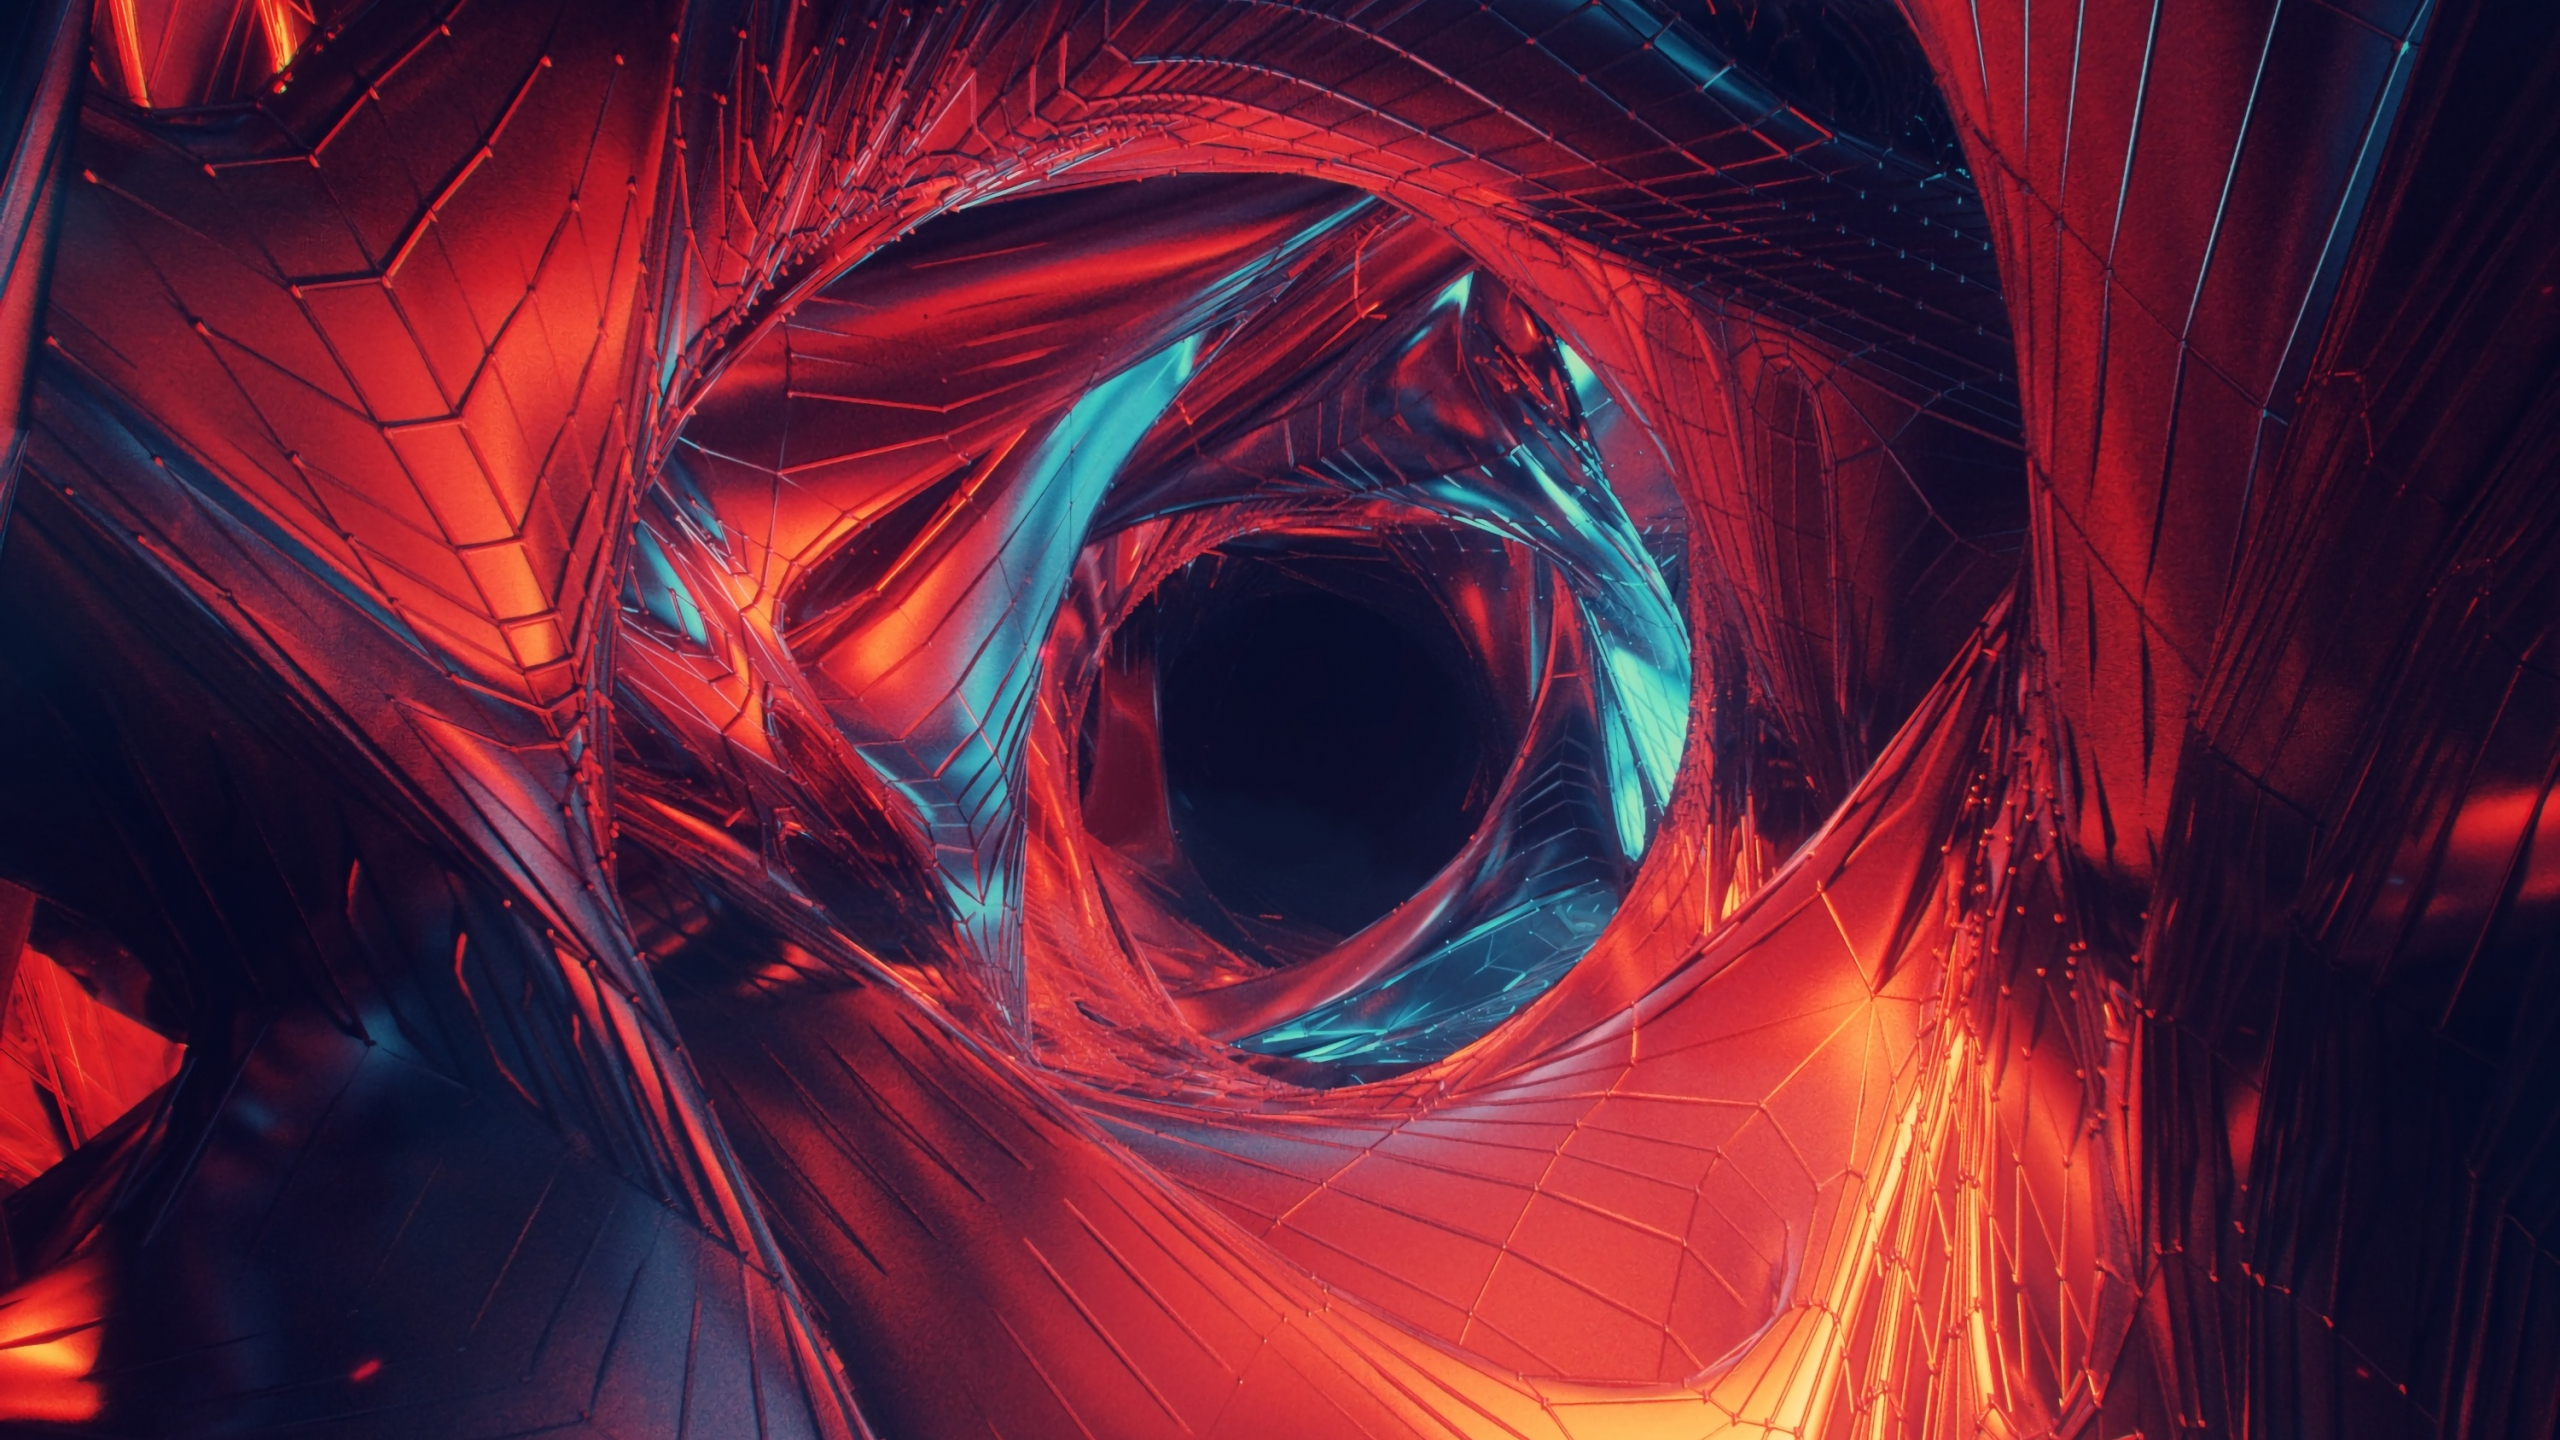 2560x1440 Download wormhole, digital art, abstract wallpaper, dual wide 16:9 hd image, background, 7448